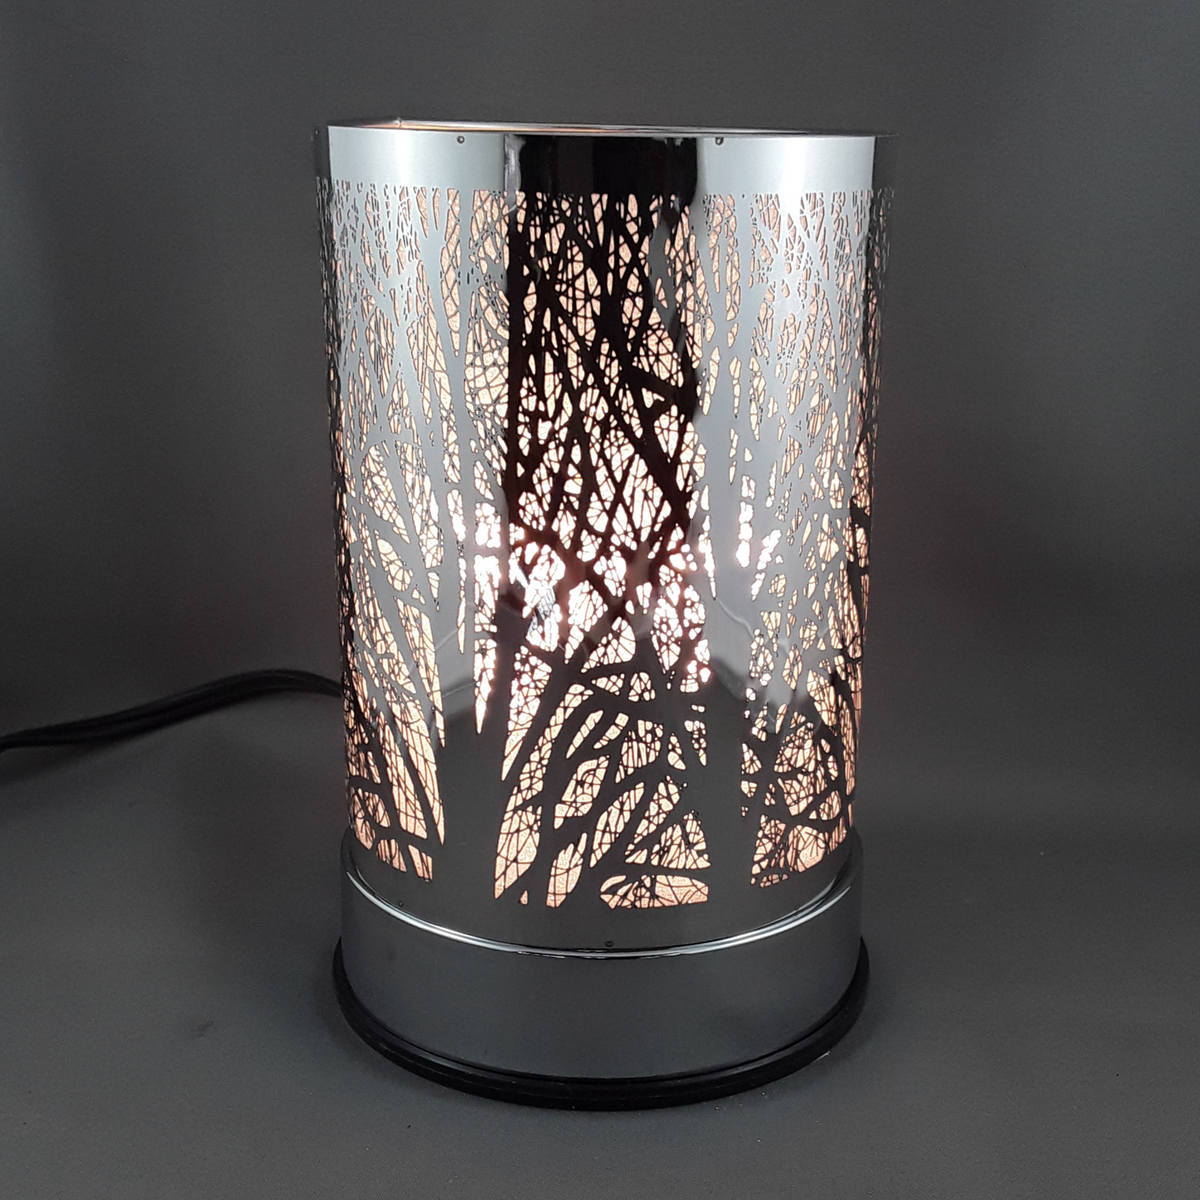 Touch lamp with oil burner | Trees - Birdie’s Nest Inc 